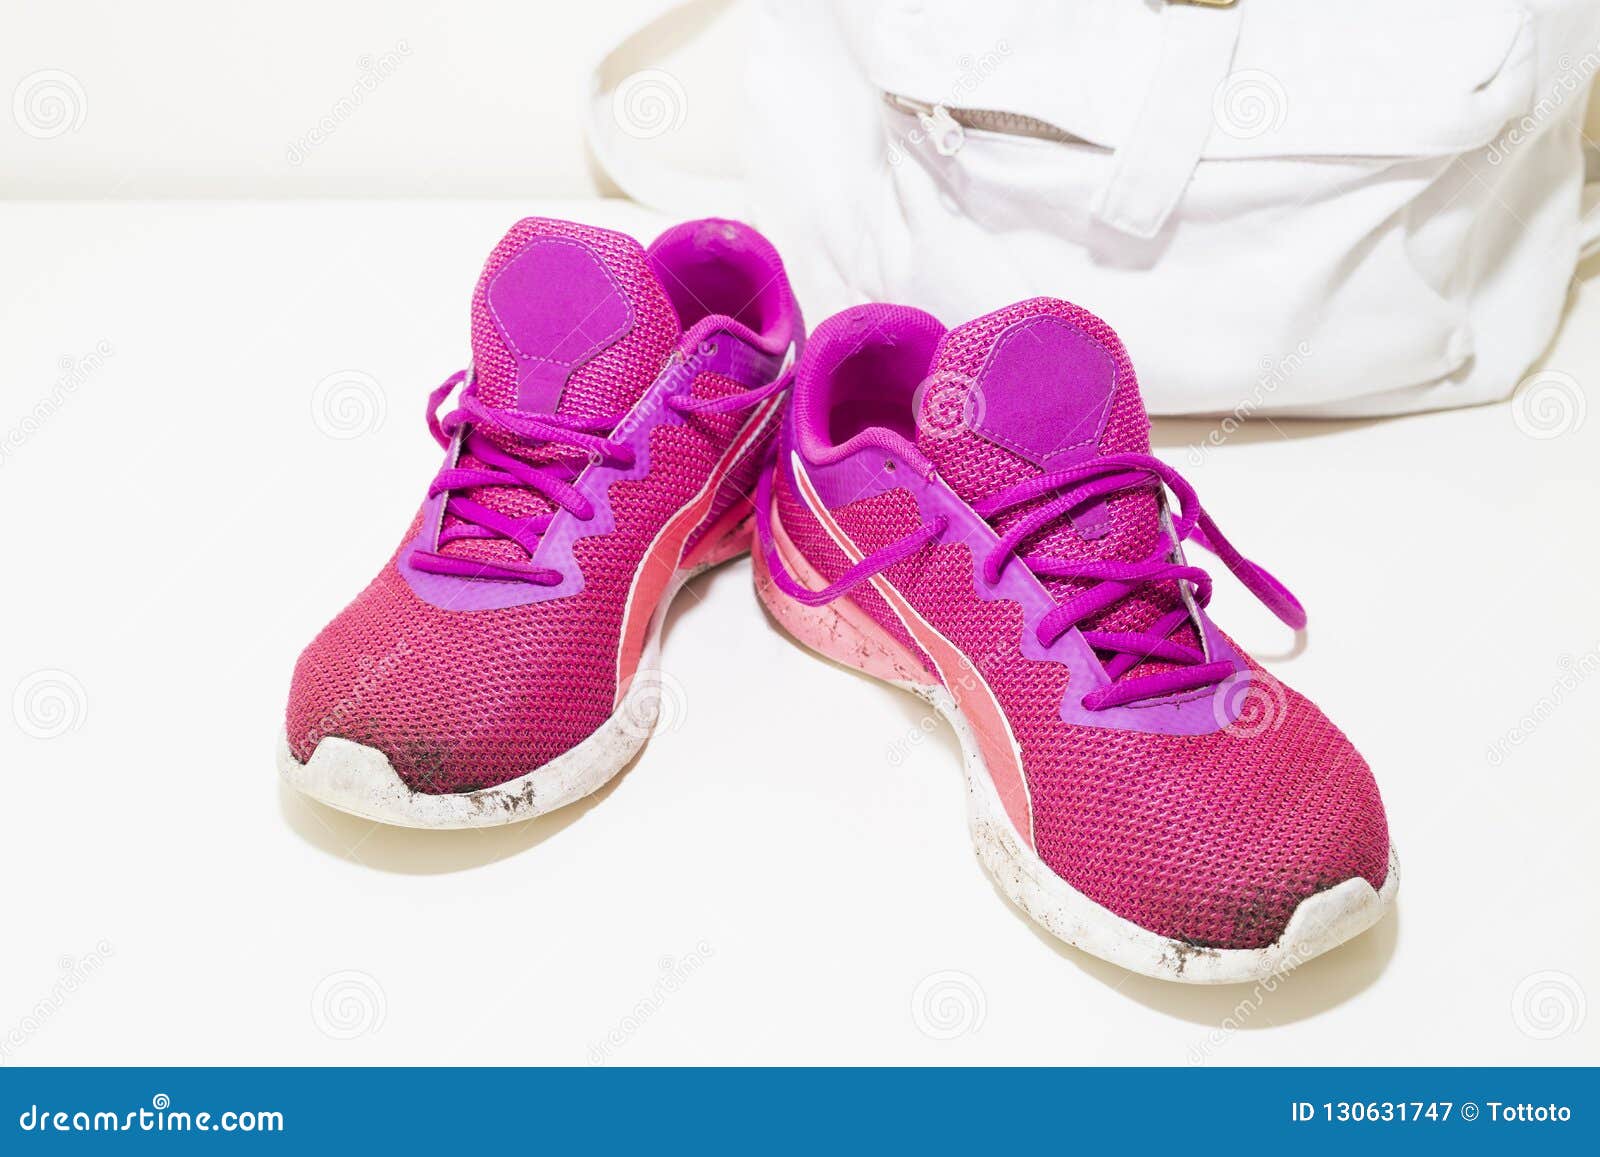 Dirty Pink Sneakers and White Backpack Stock Image - Image of fashion ...